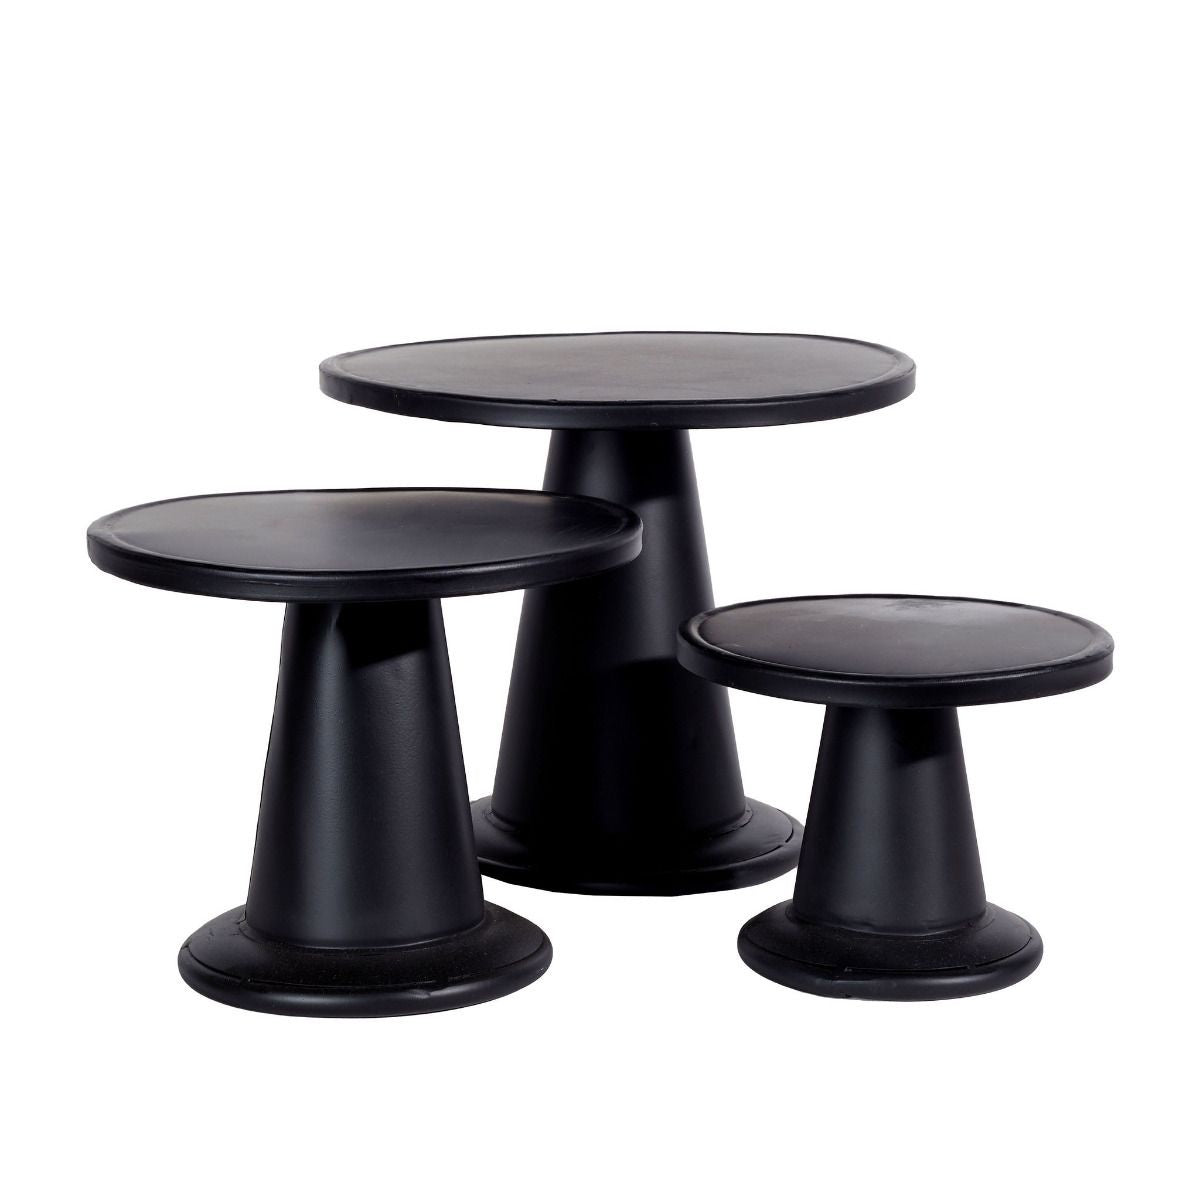 Picardy Cake Stand - Lge